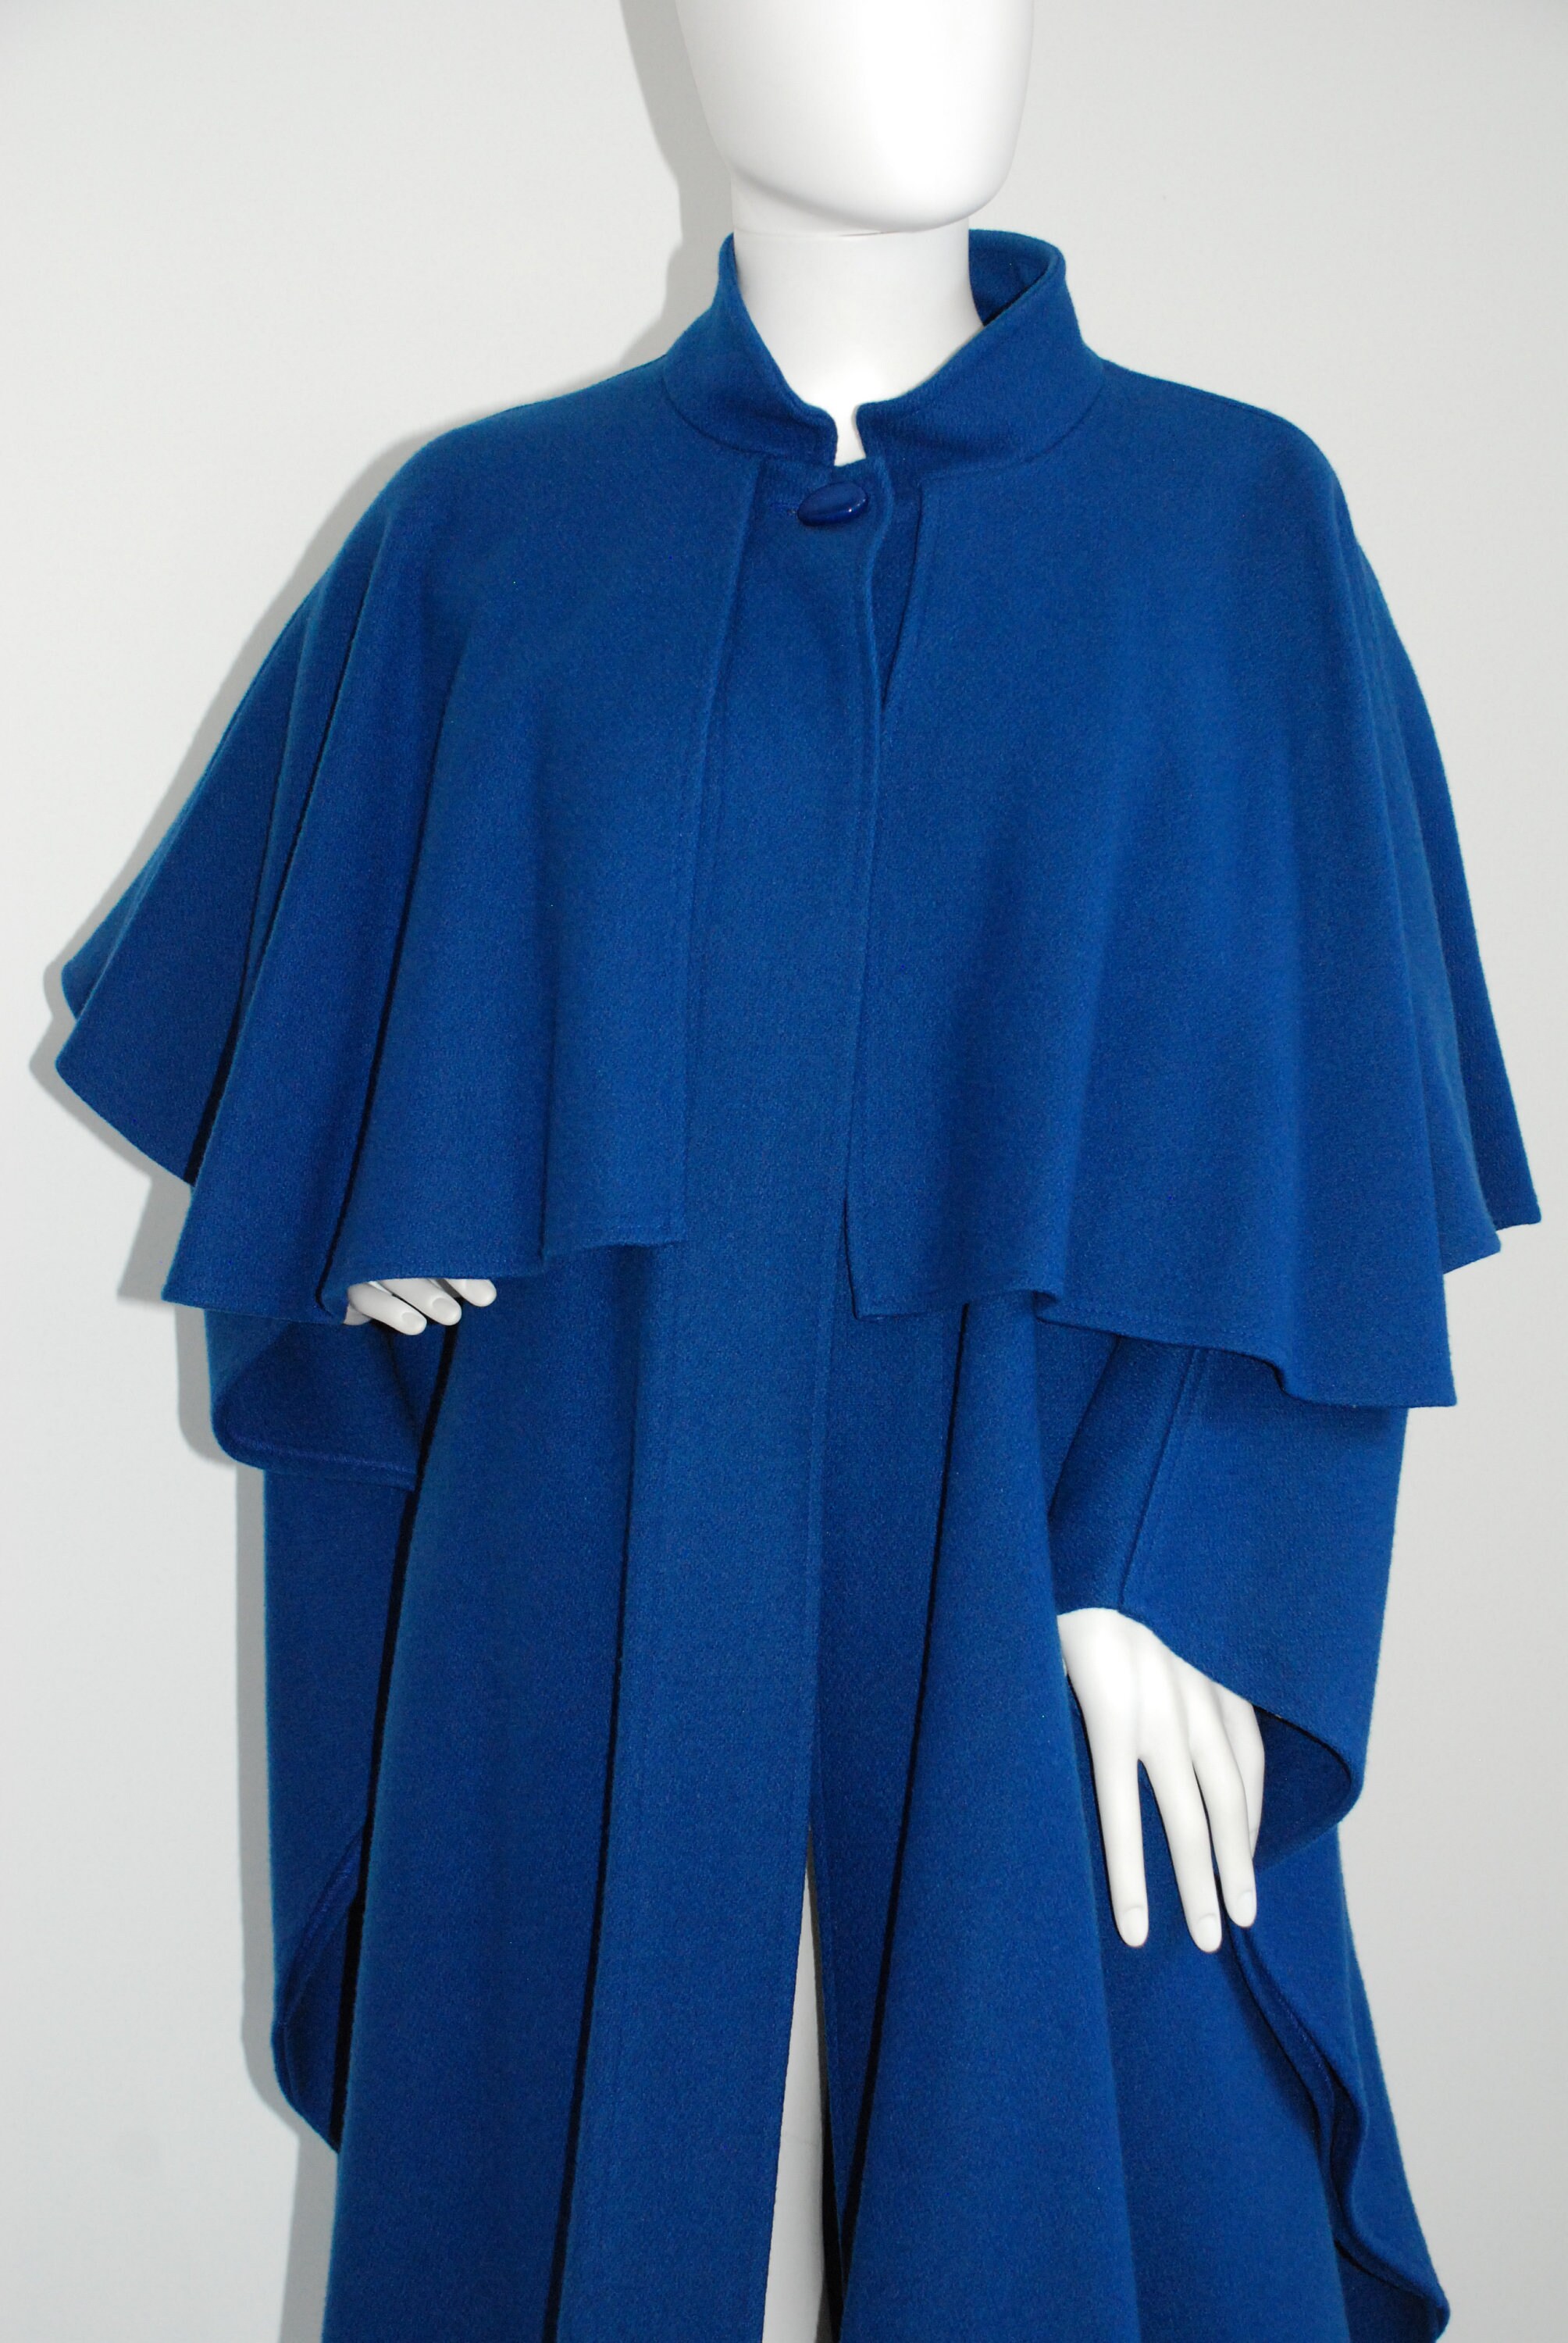 60's Vintage Coat, Dani Colby Cape Jacket, Layered, Made in USA, Royal ...